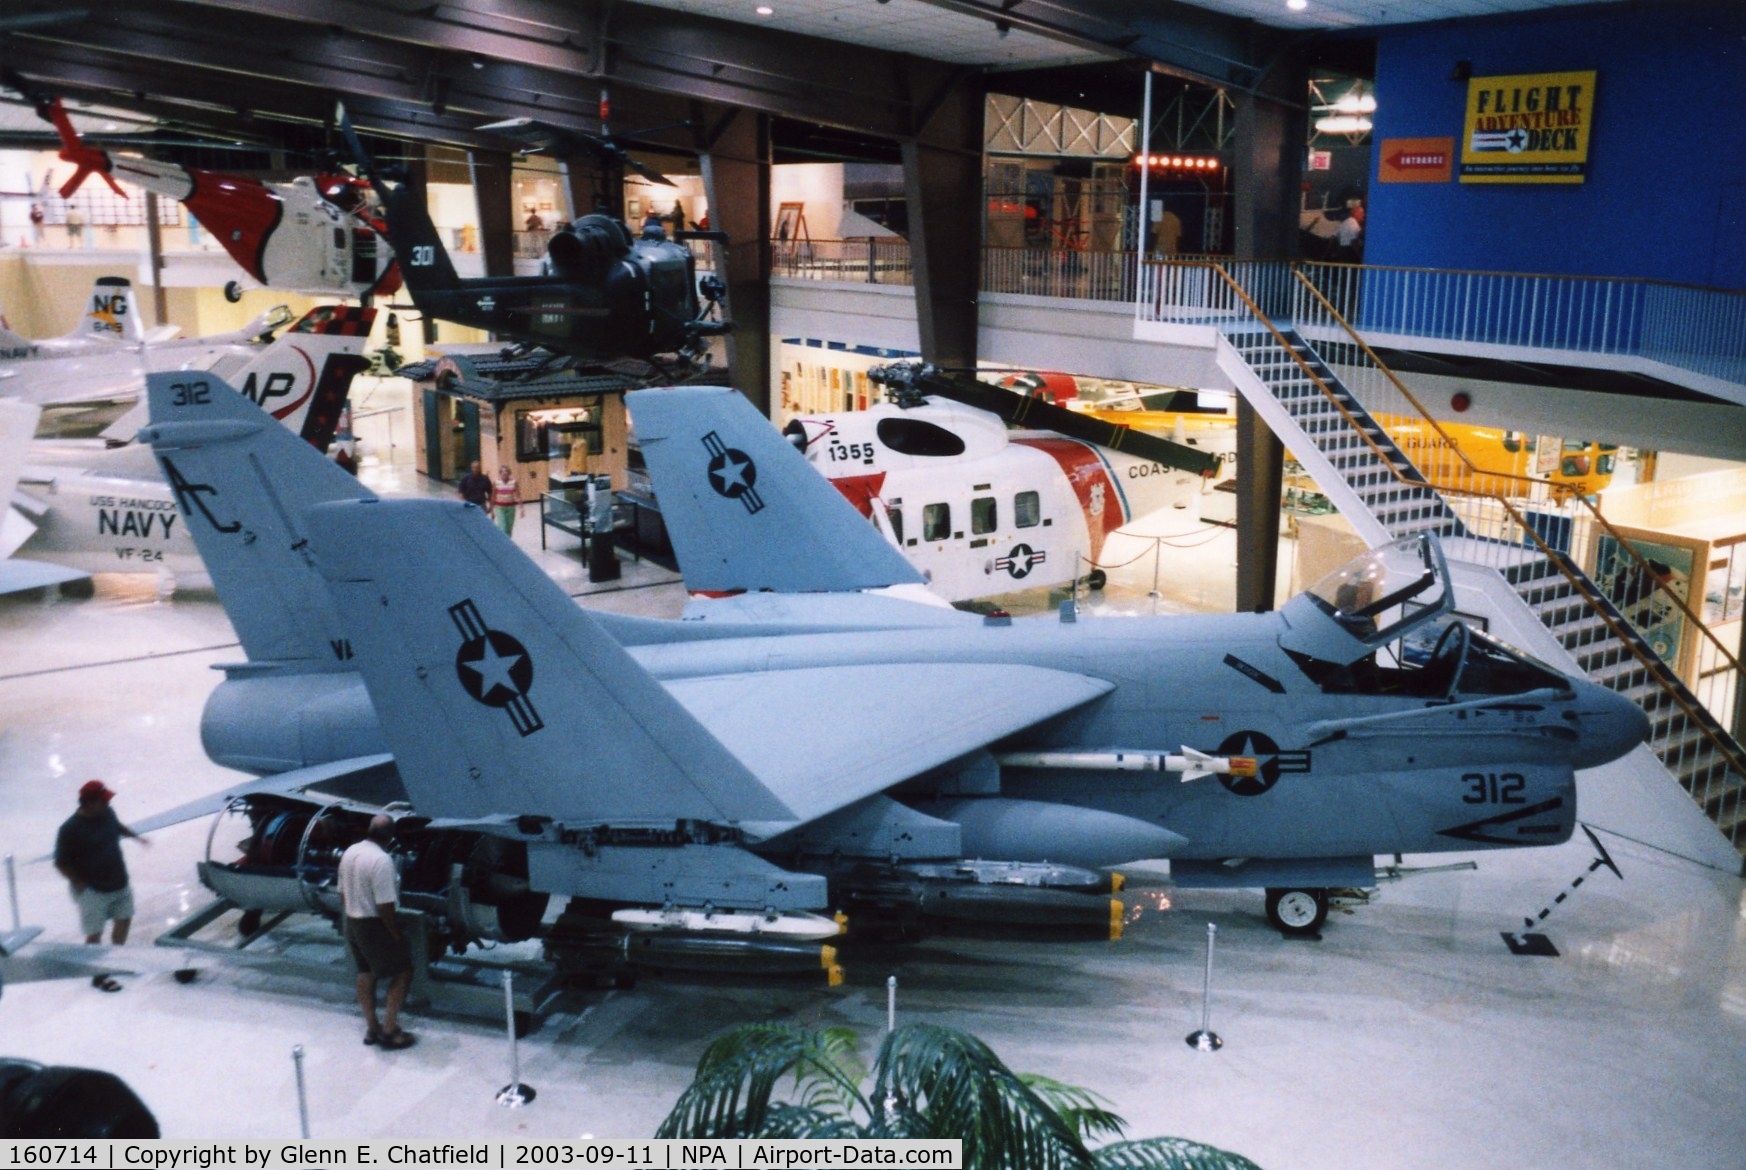 160714, LTV A-7E Corsair II C/N E-547, A-7E at the National Museum of Naval Aviation